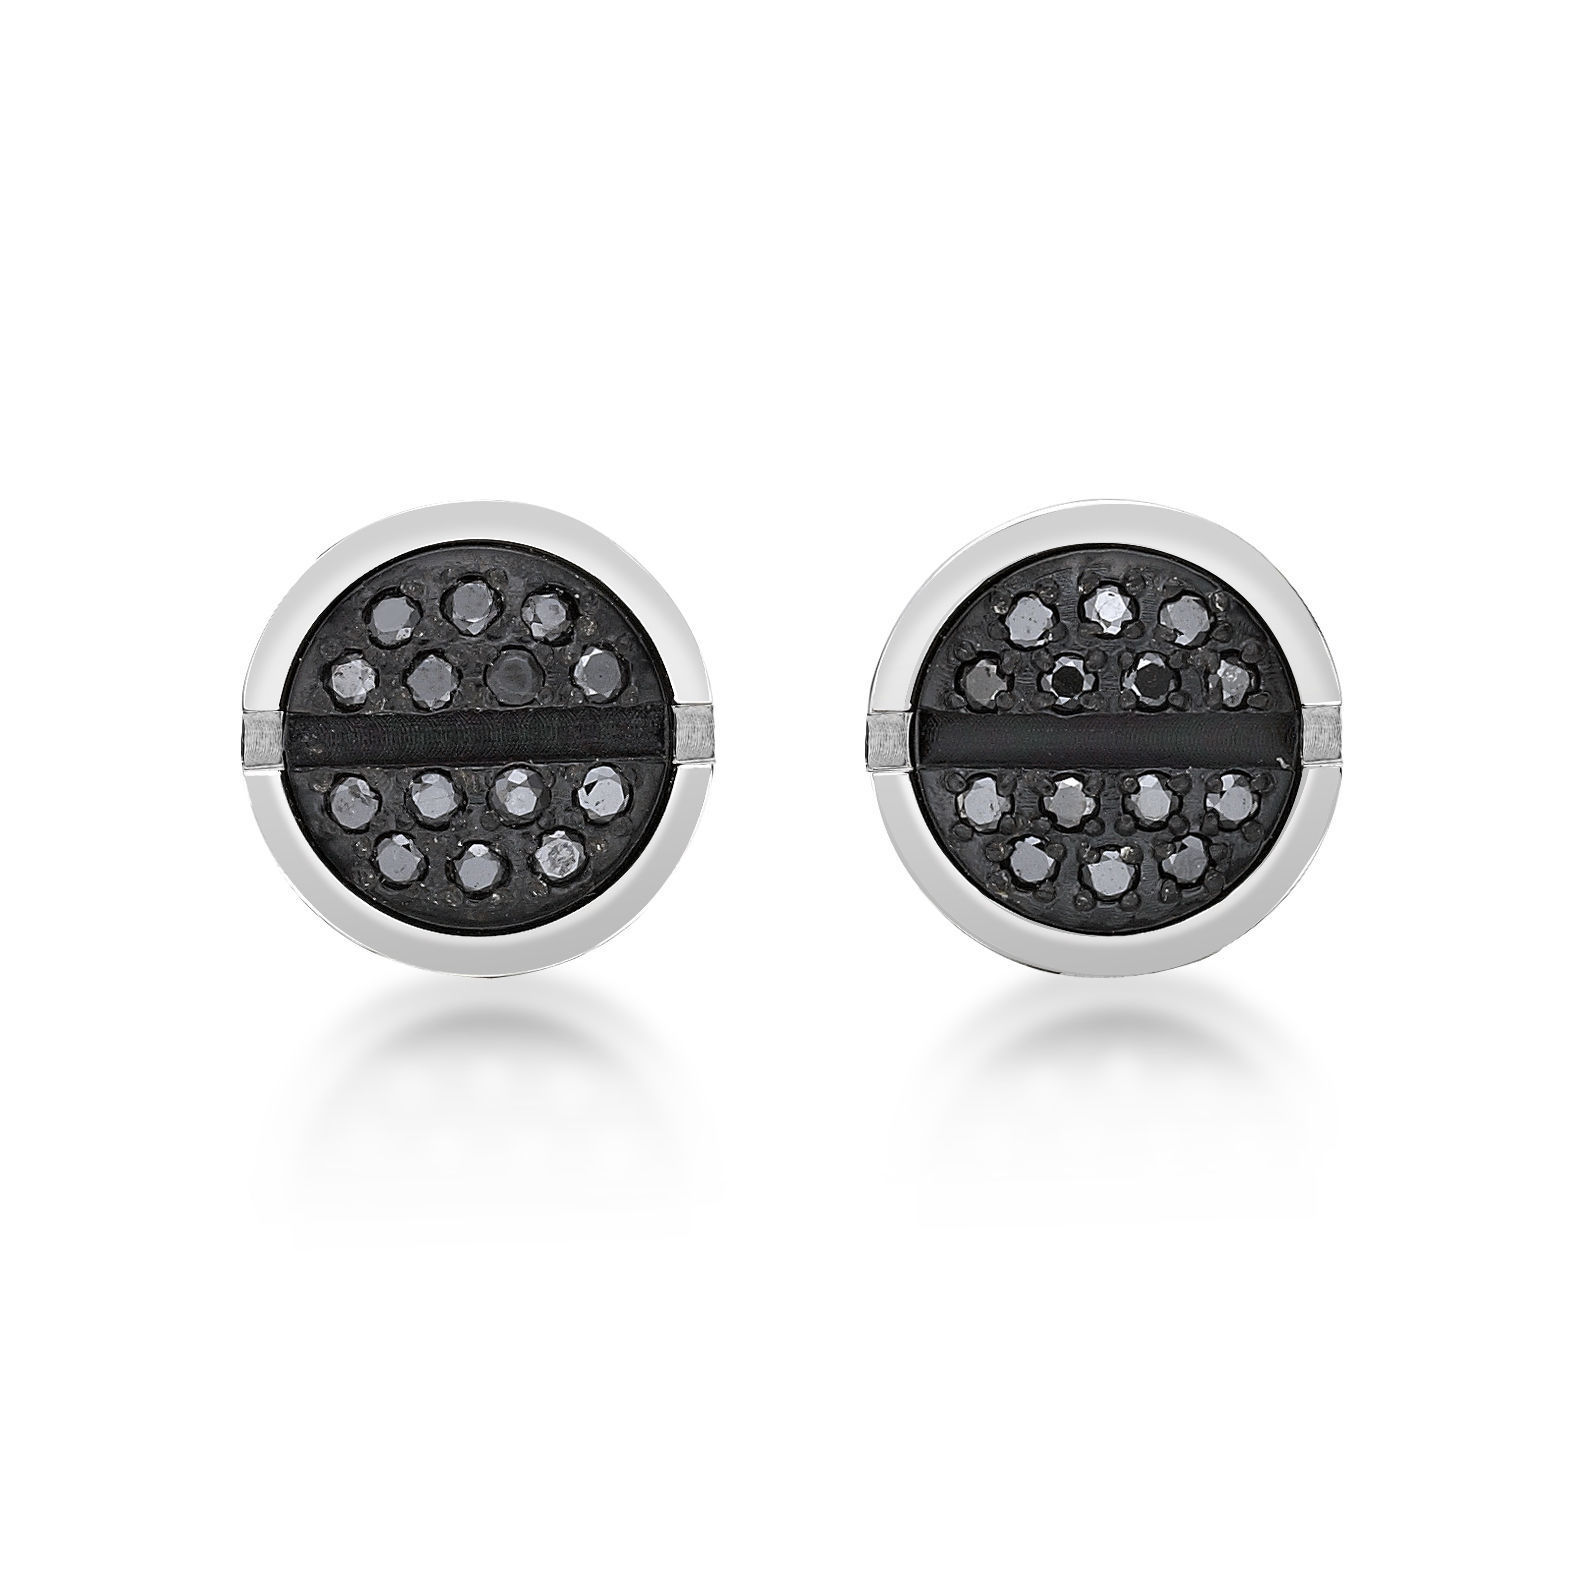 Men's Round Black Diamond Stainless Steel Stainless Steel Round Stud Earrings - 9MM with Friction Back (Pair) | Metro Jewelry